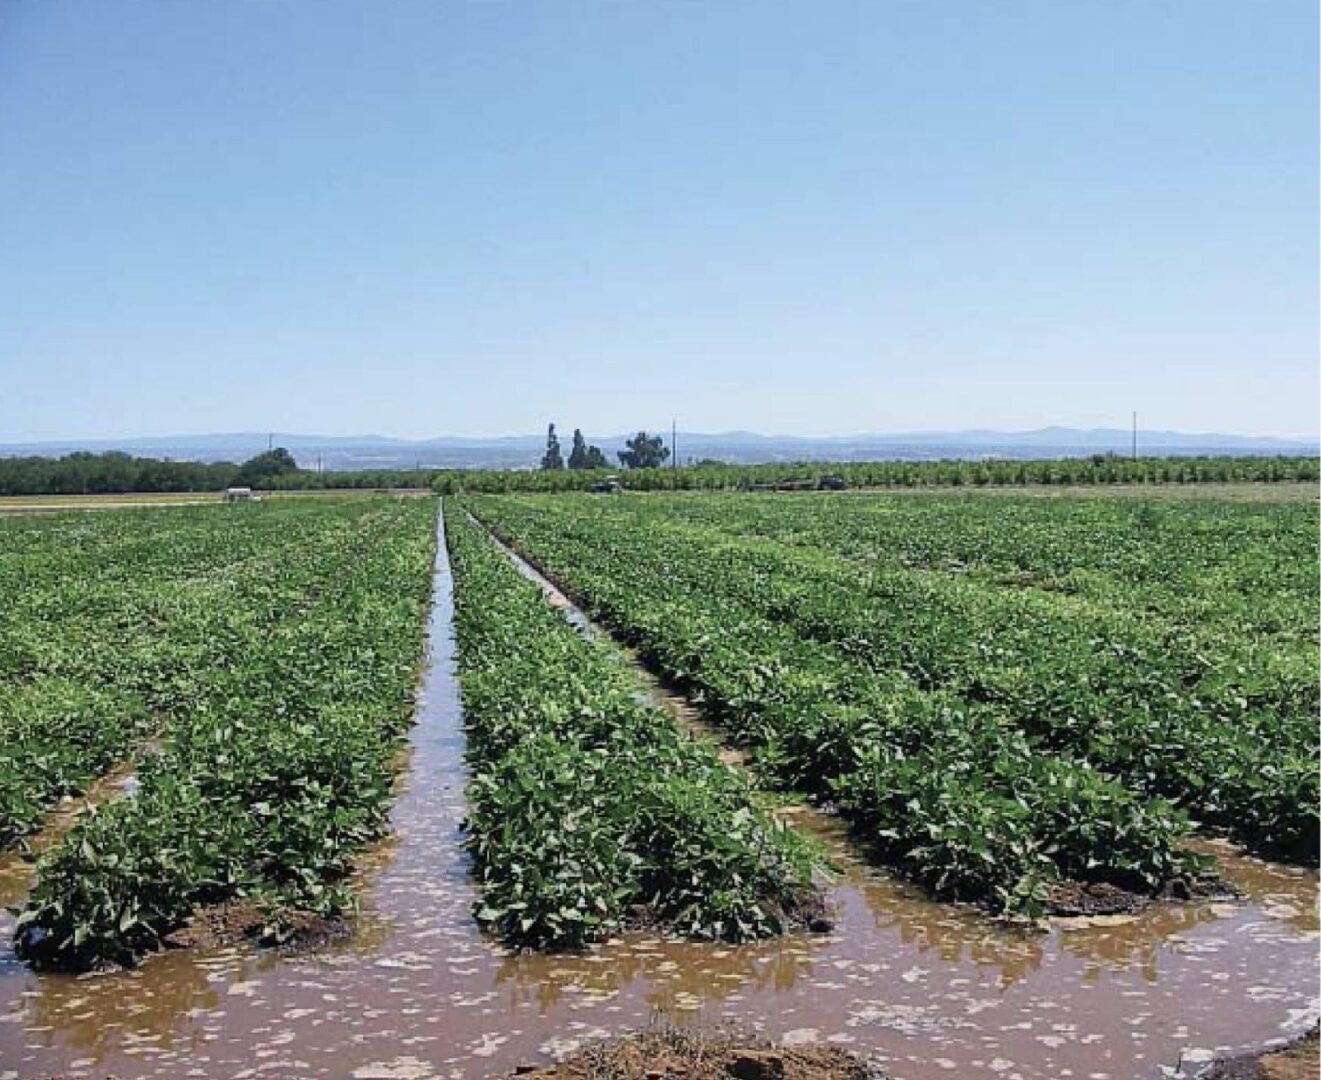 Flooded field of produce